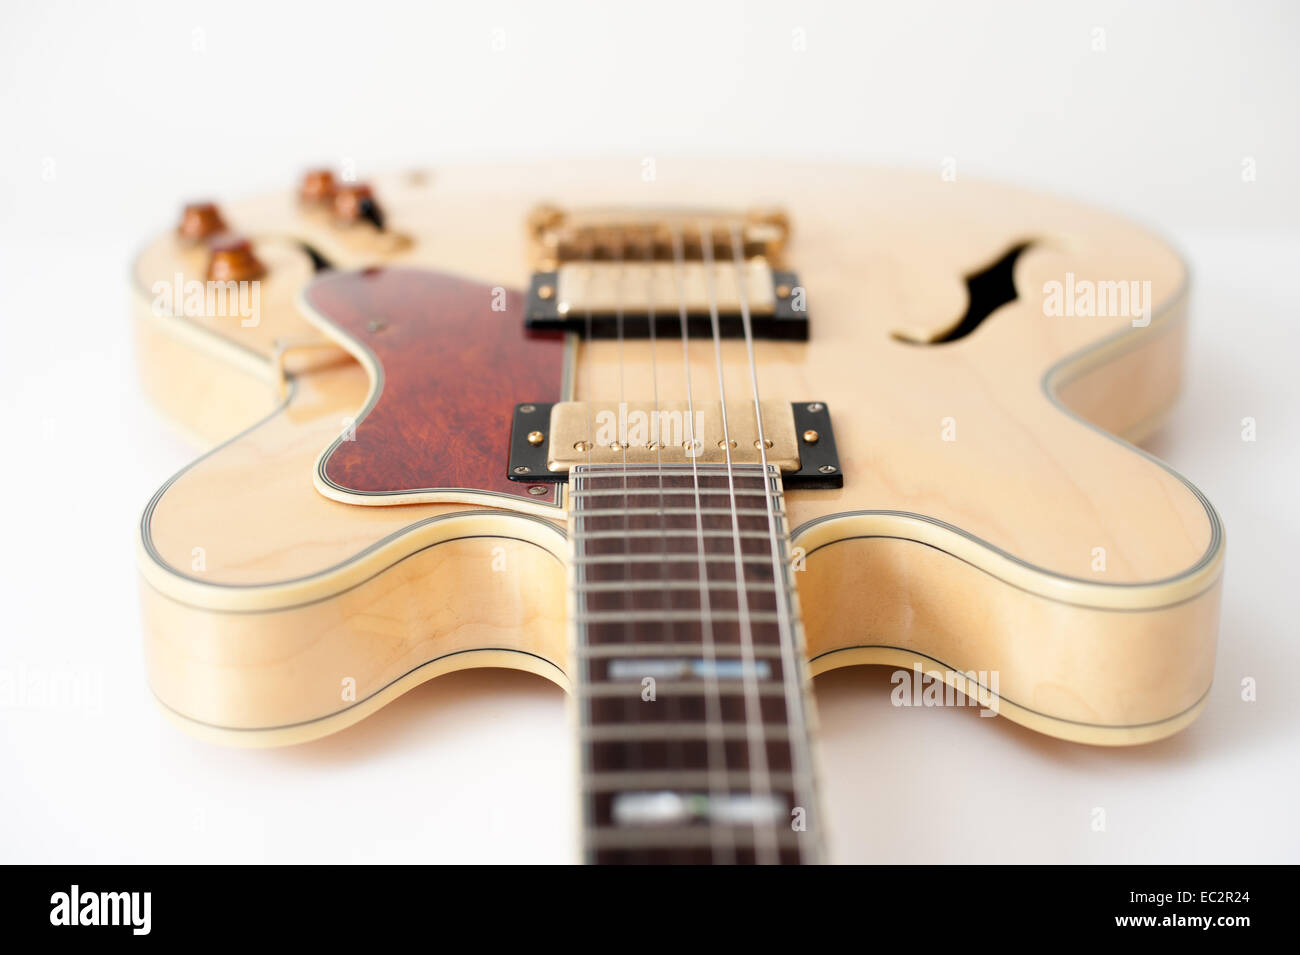 Detail of brown electric guitar with out of focus body Stock Photo